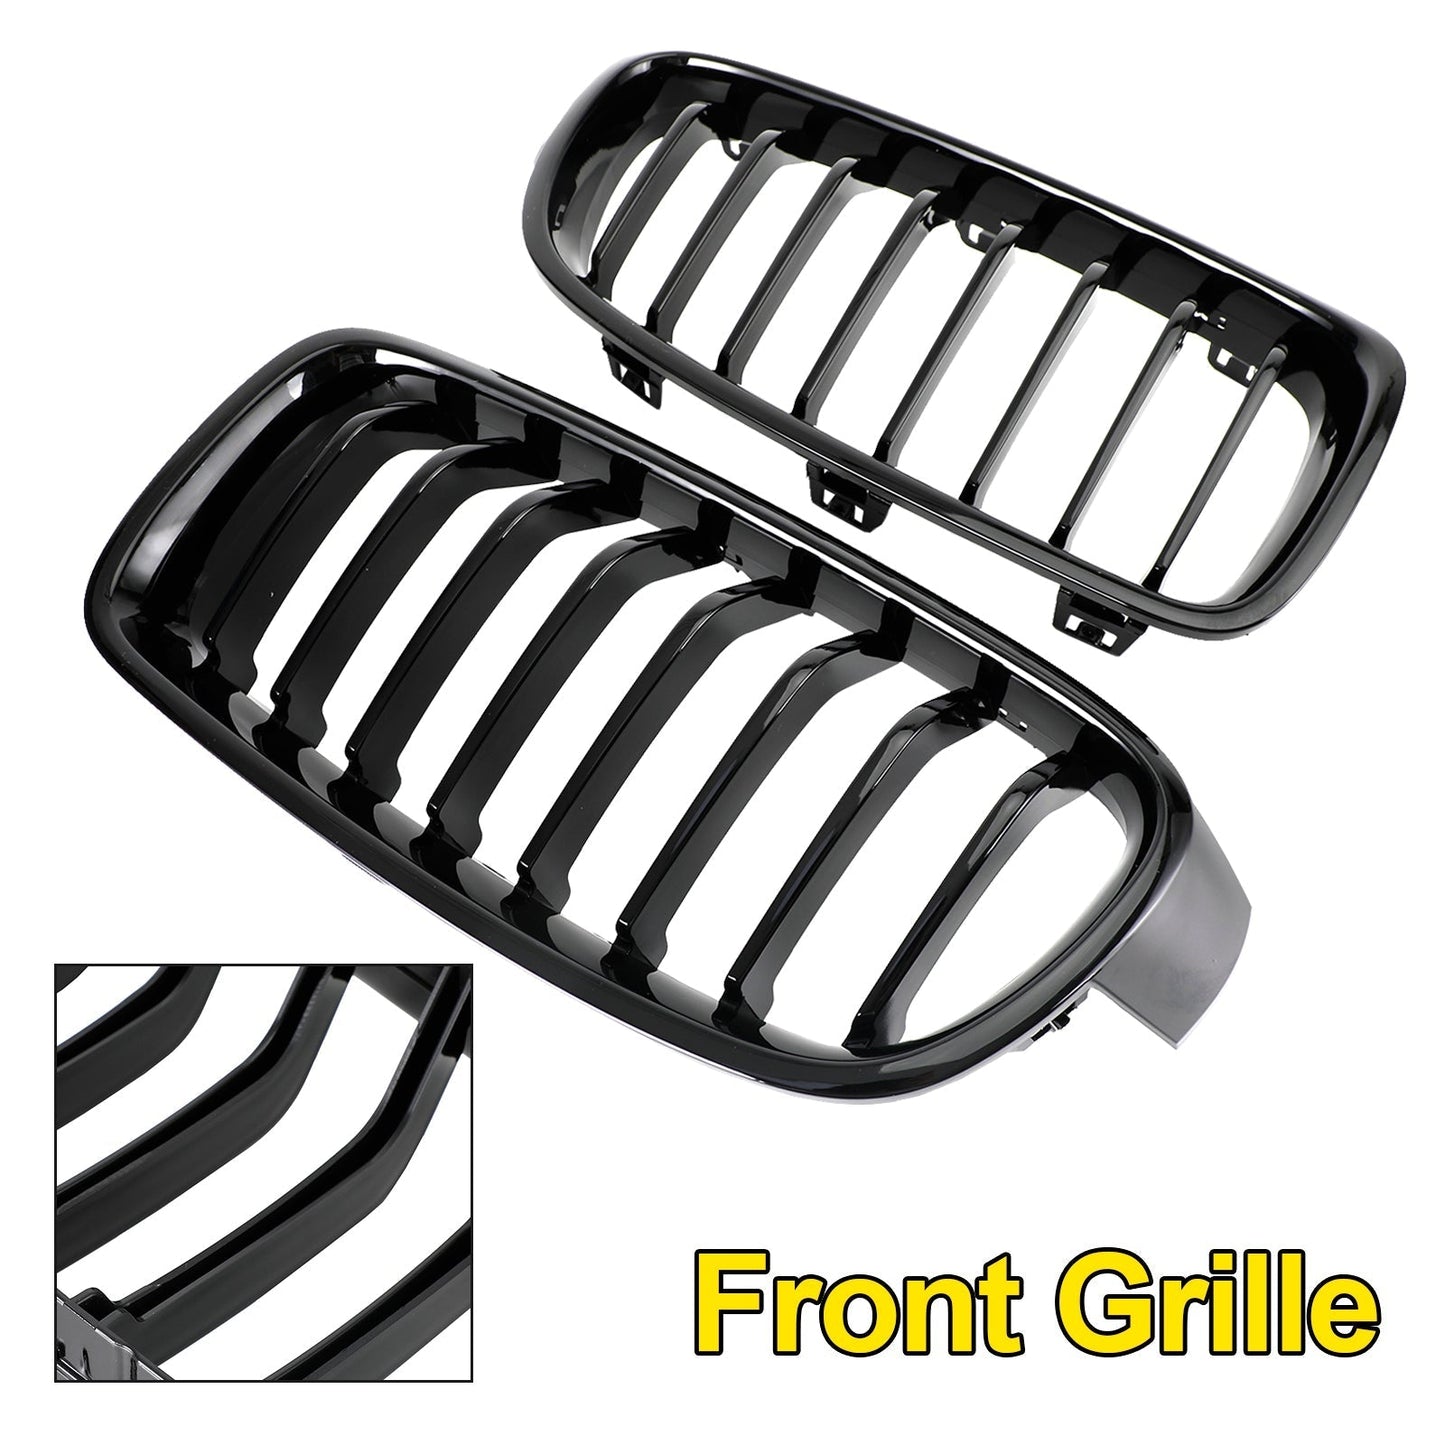 2012-2019 BMW 3-Series F31 Touring Gloss Black Front Kidney Grill Grille